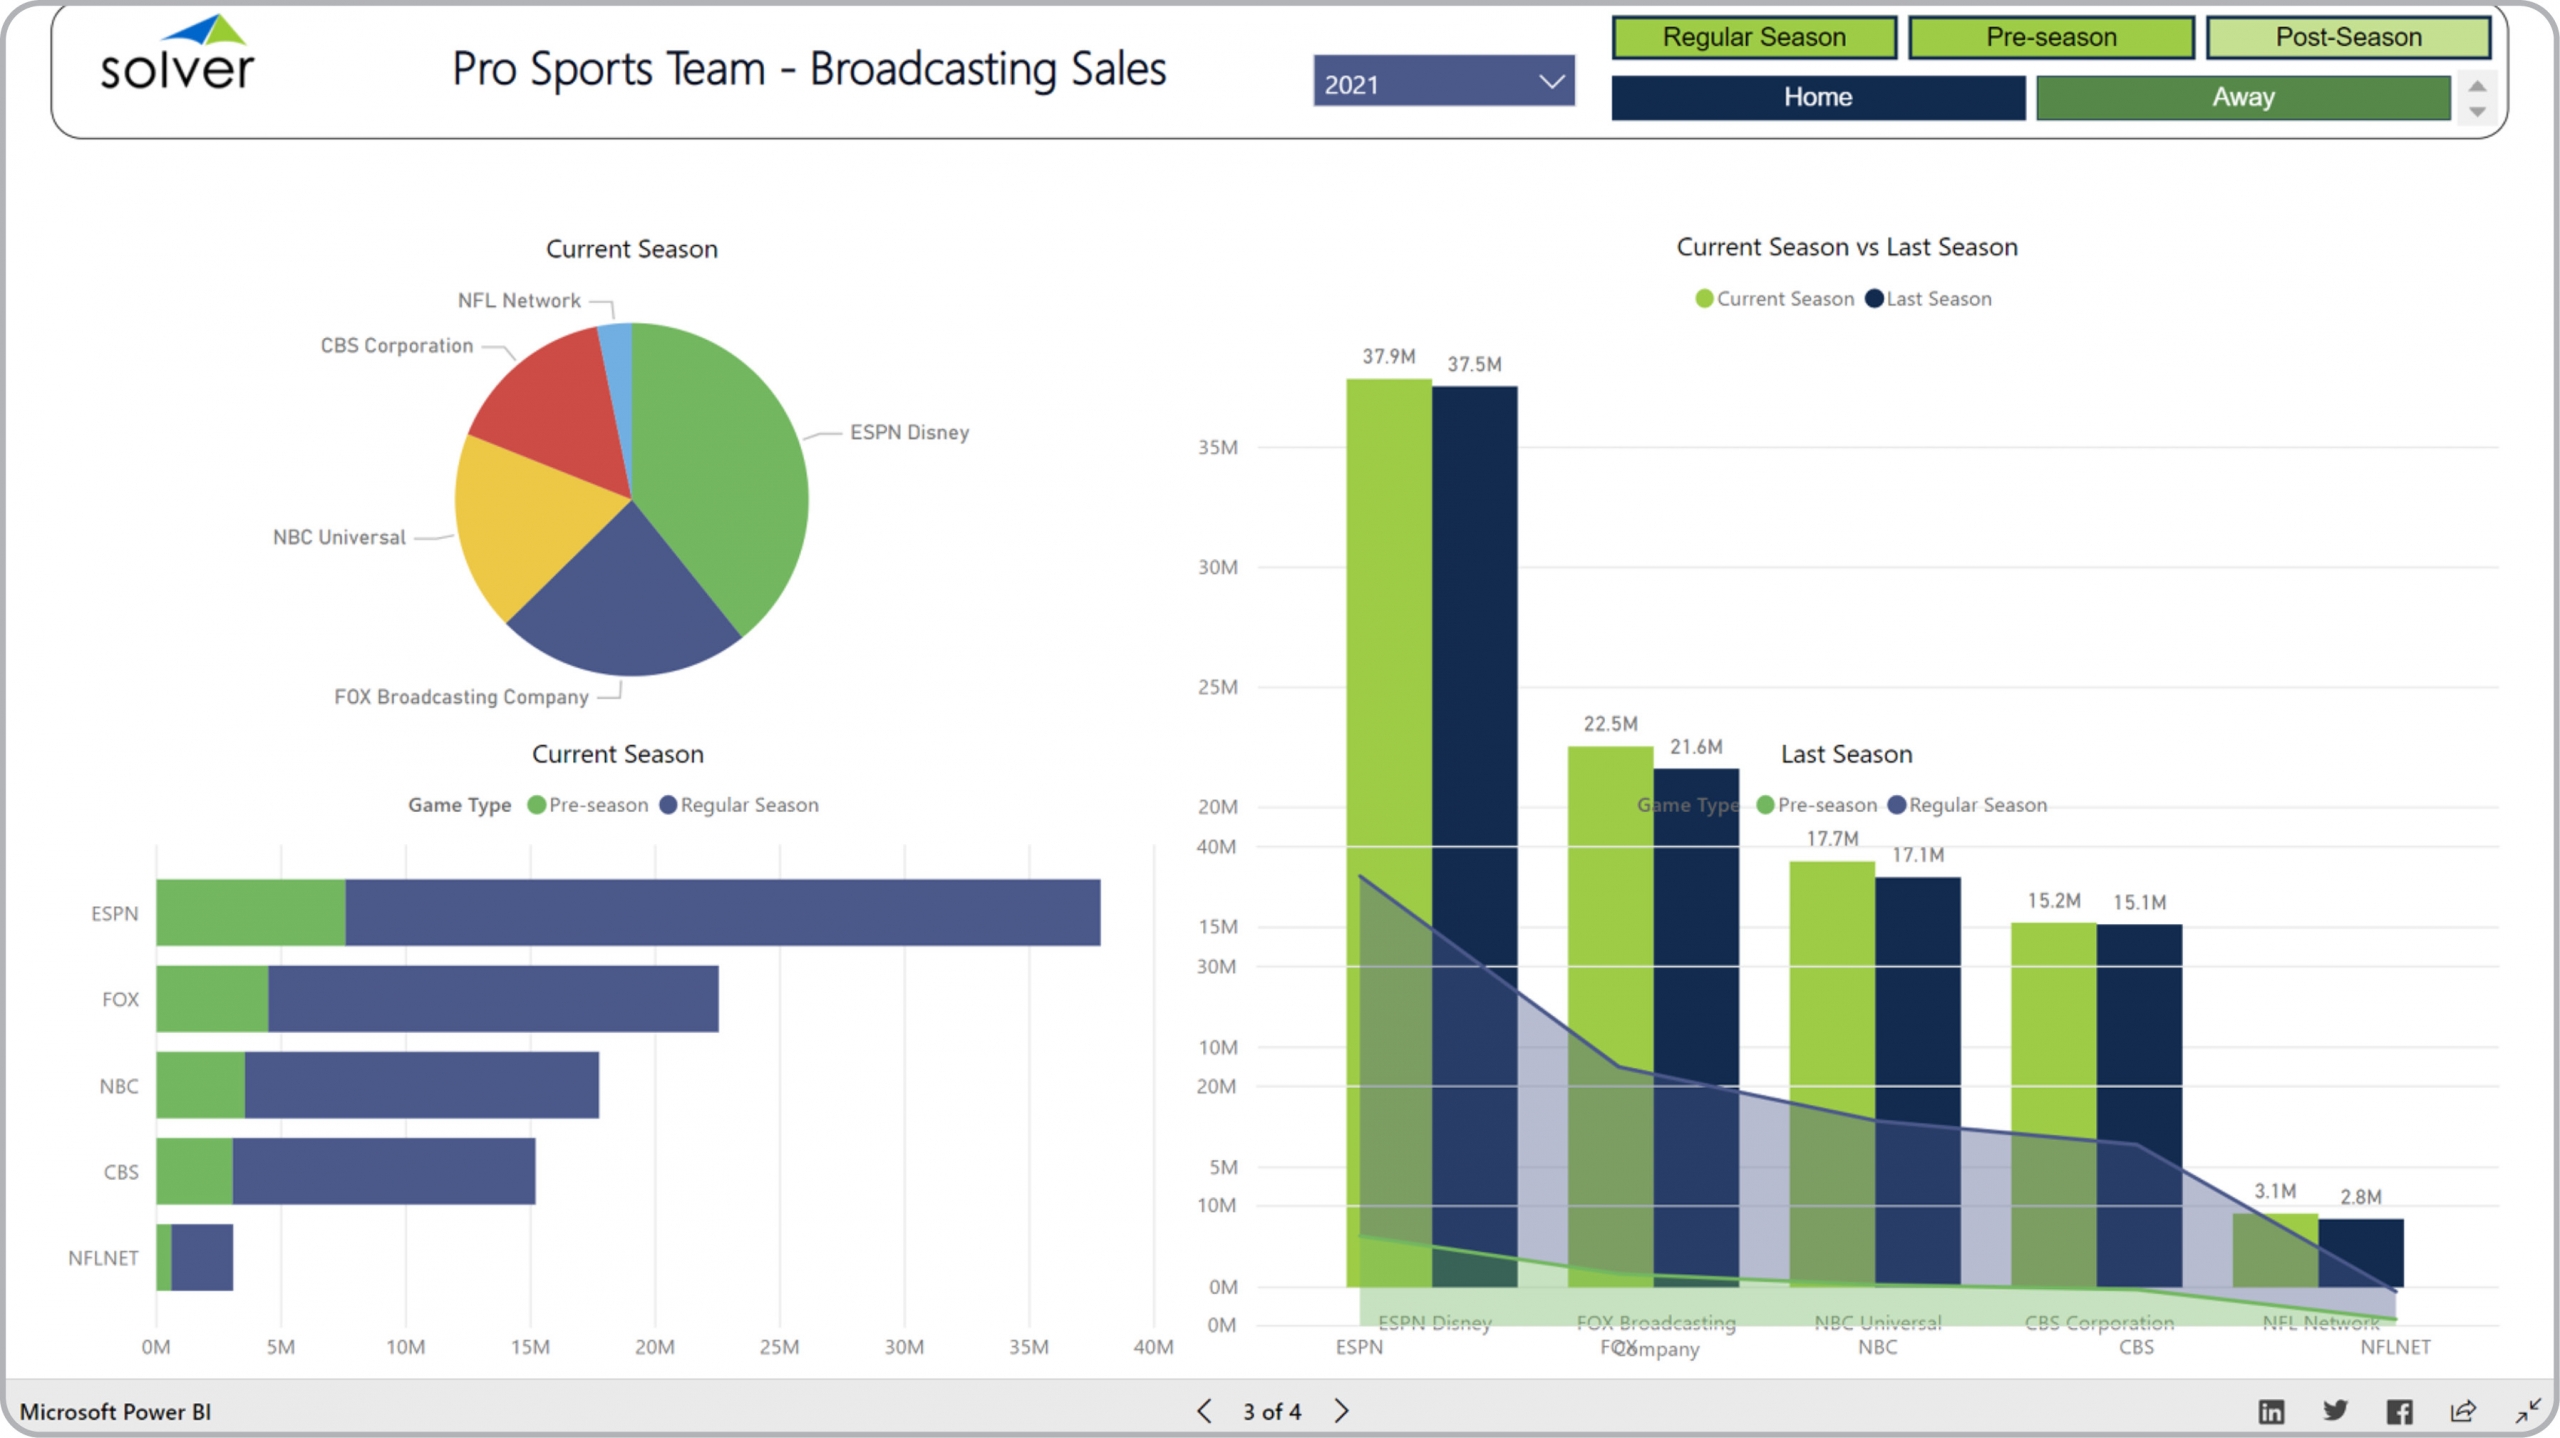 Example of a Broadcasting Sales Dashboard for Professional Sports Organizations  